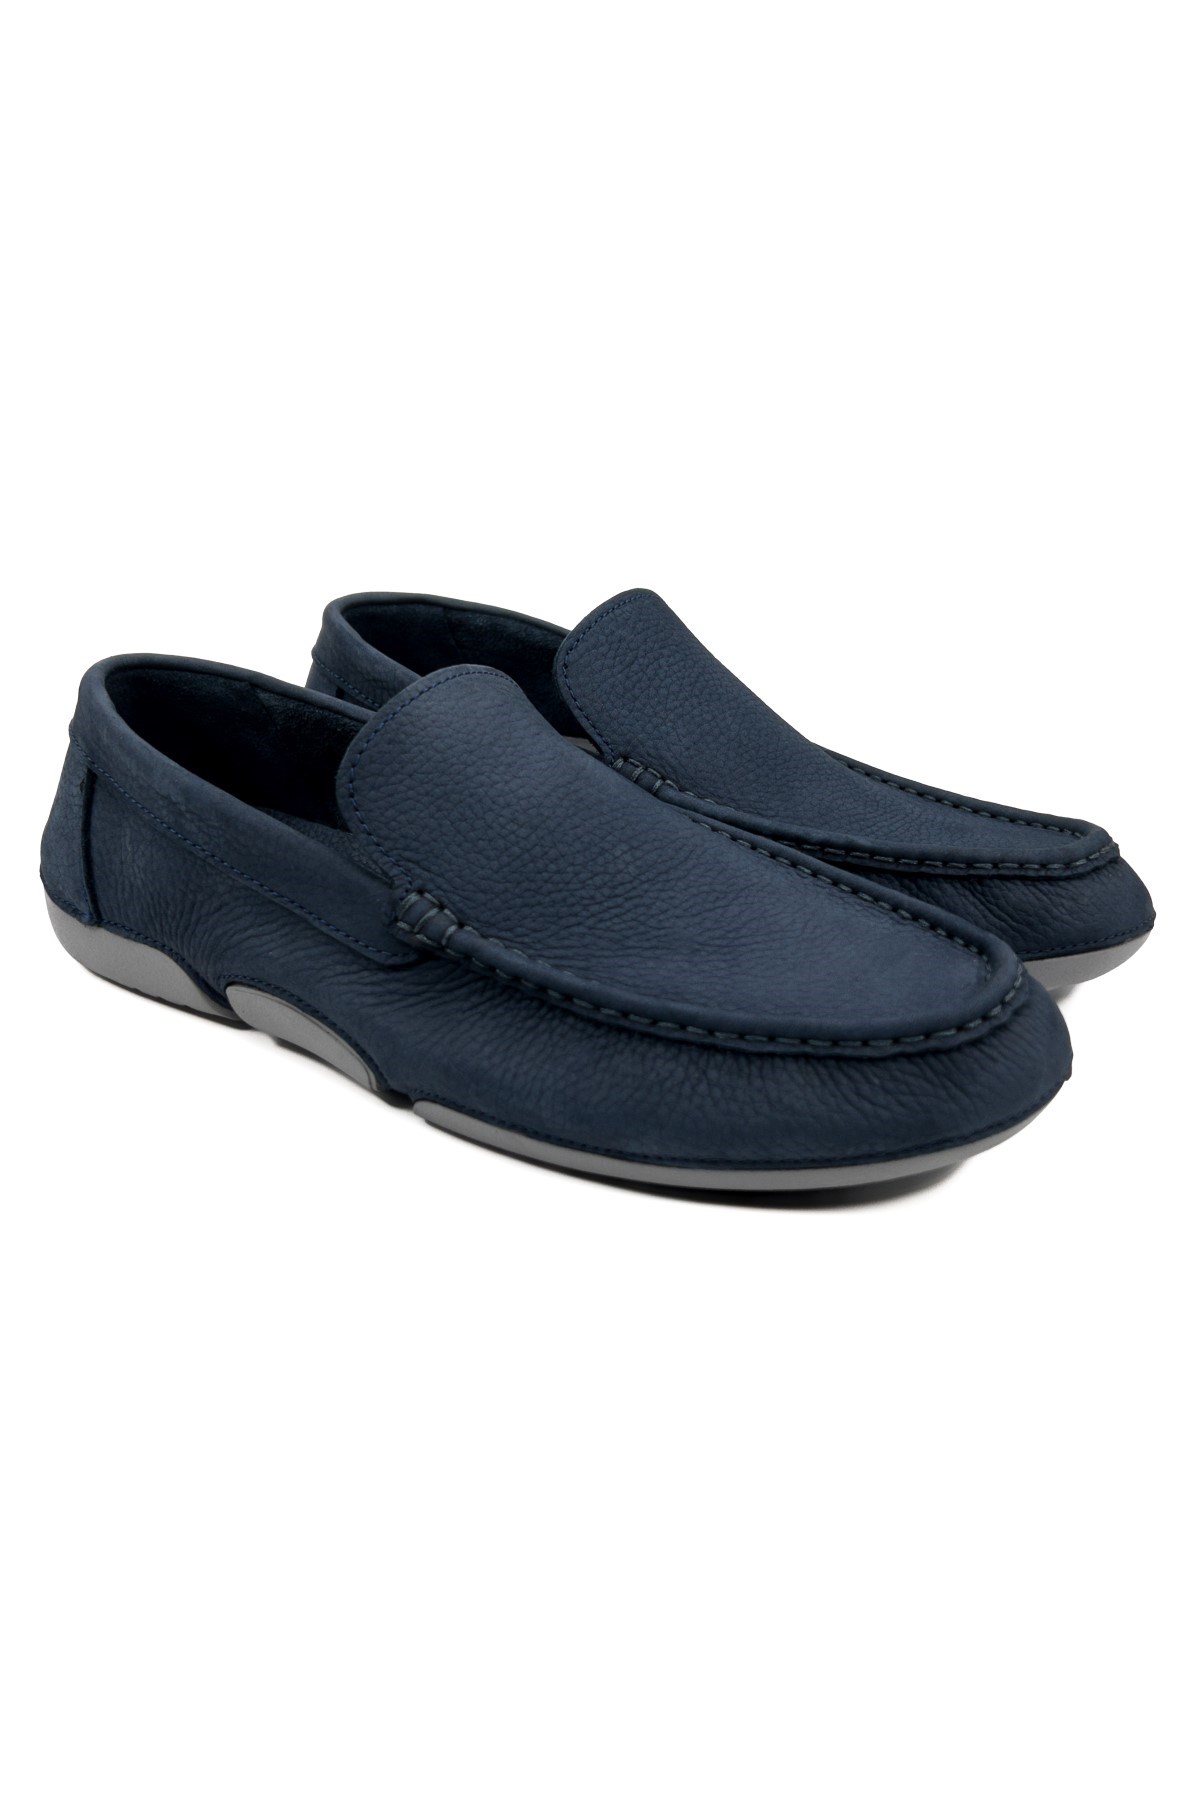 Olympos Inside Out Genuine Nubuck Leather Jeans Navy Blue Men's Shoes Loafer